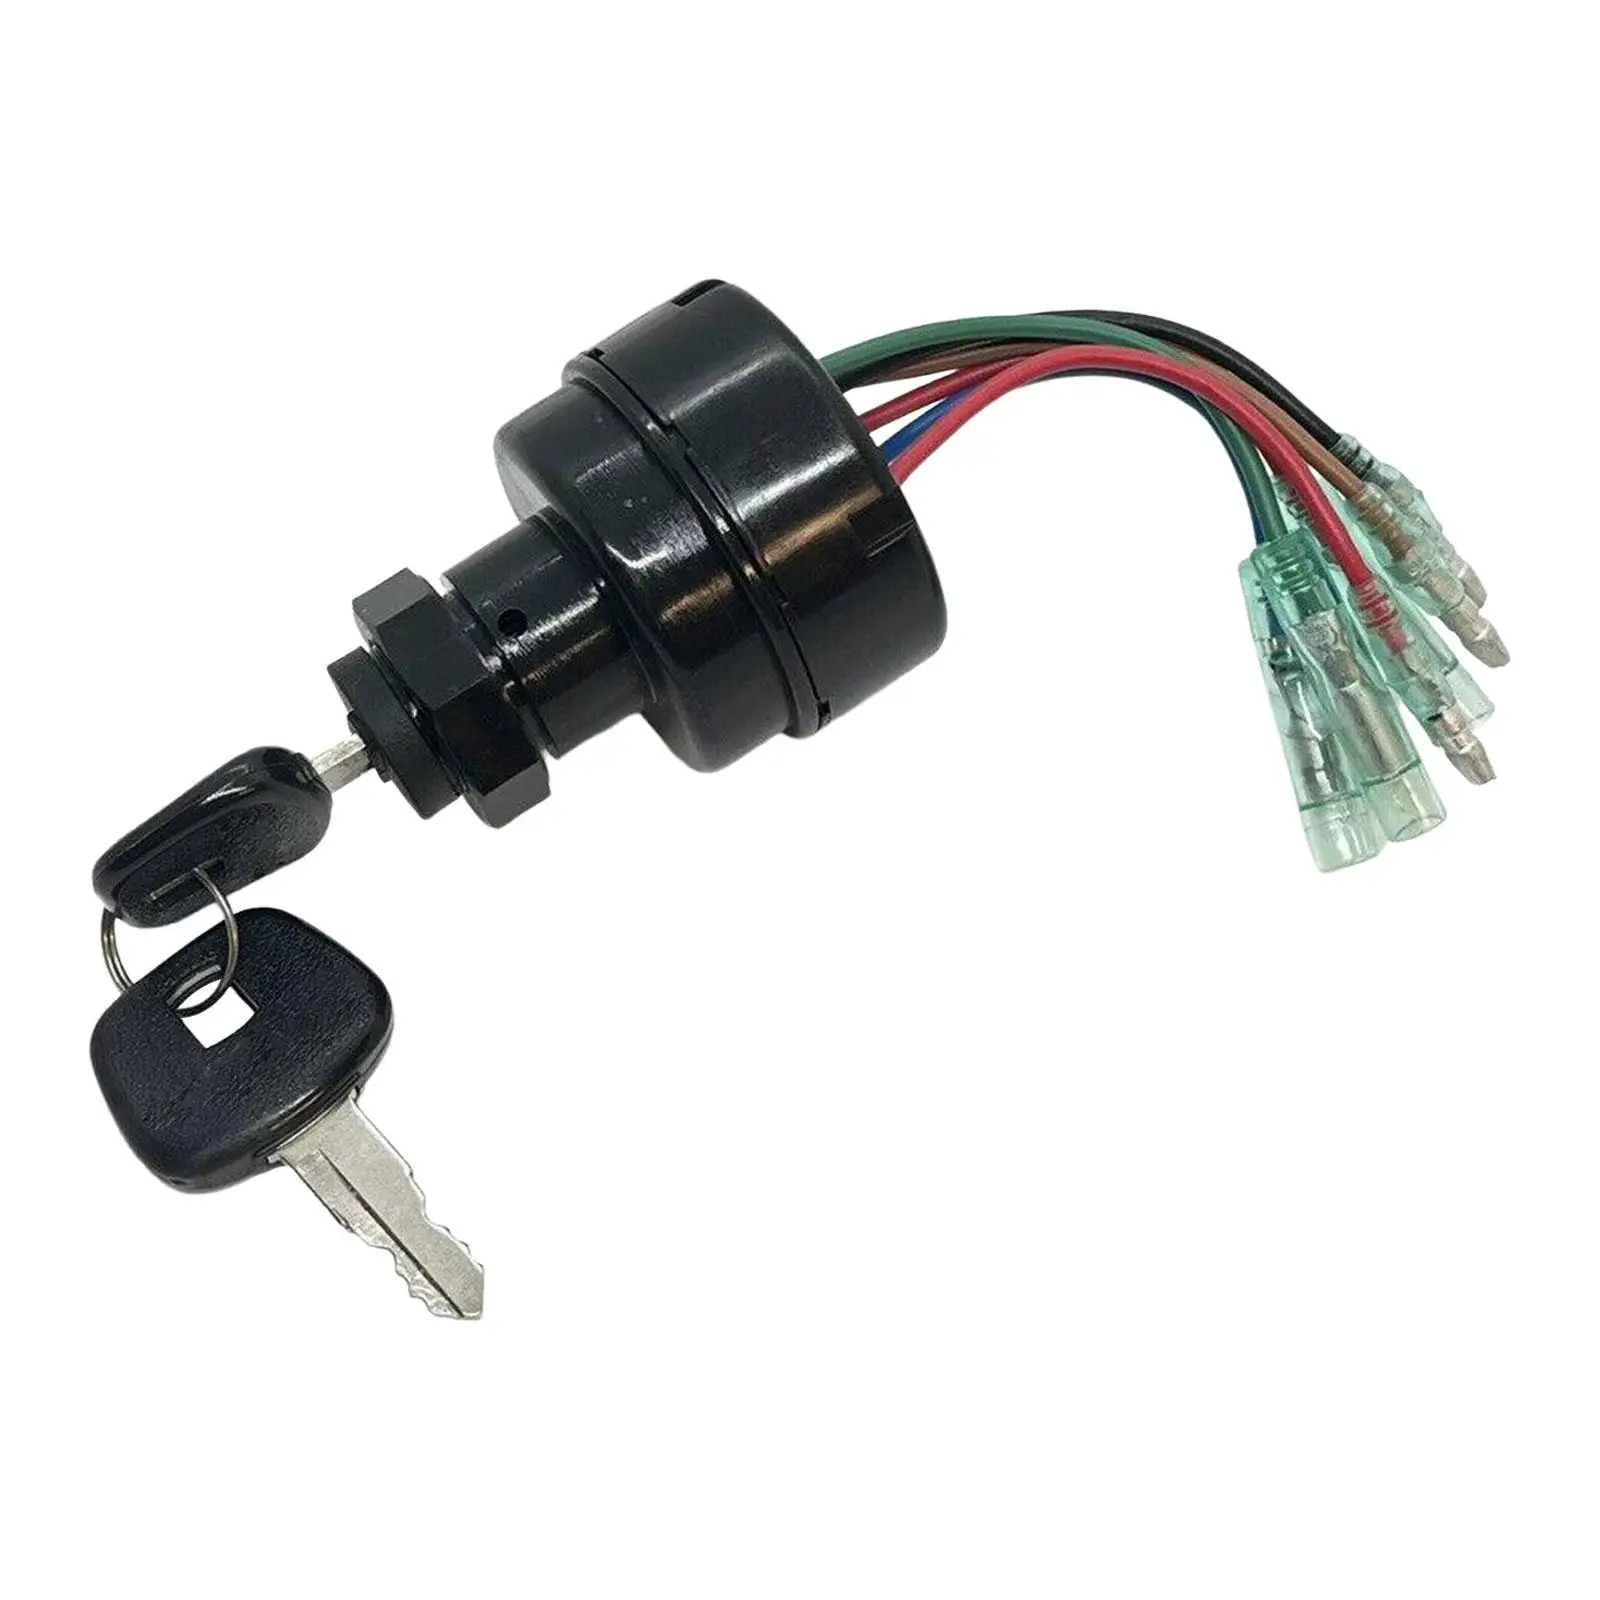 Ignition Switch 353-76020-3 for Outboard Remote Control Box for Tohatsu Replaces